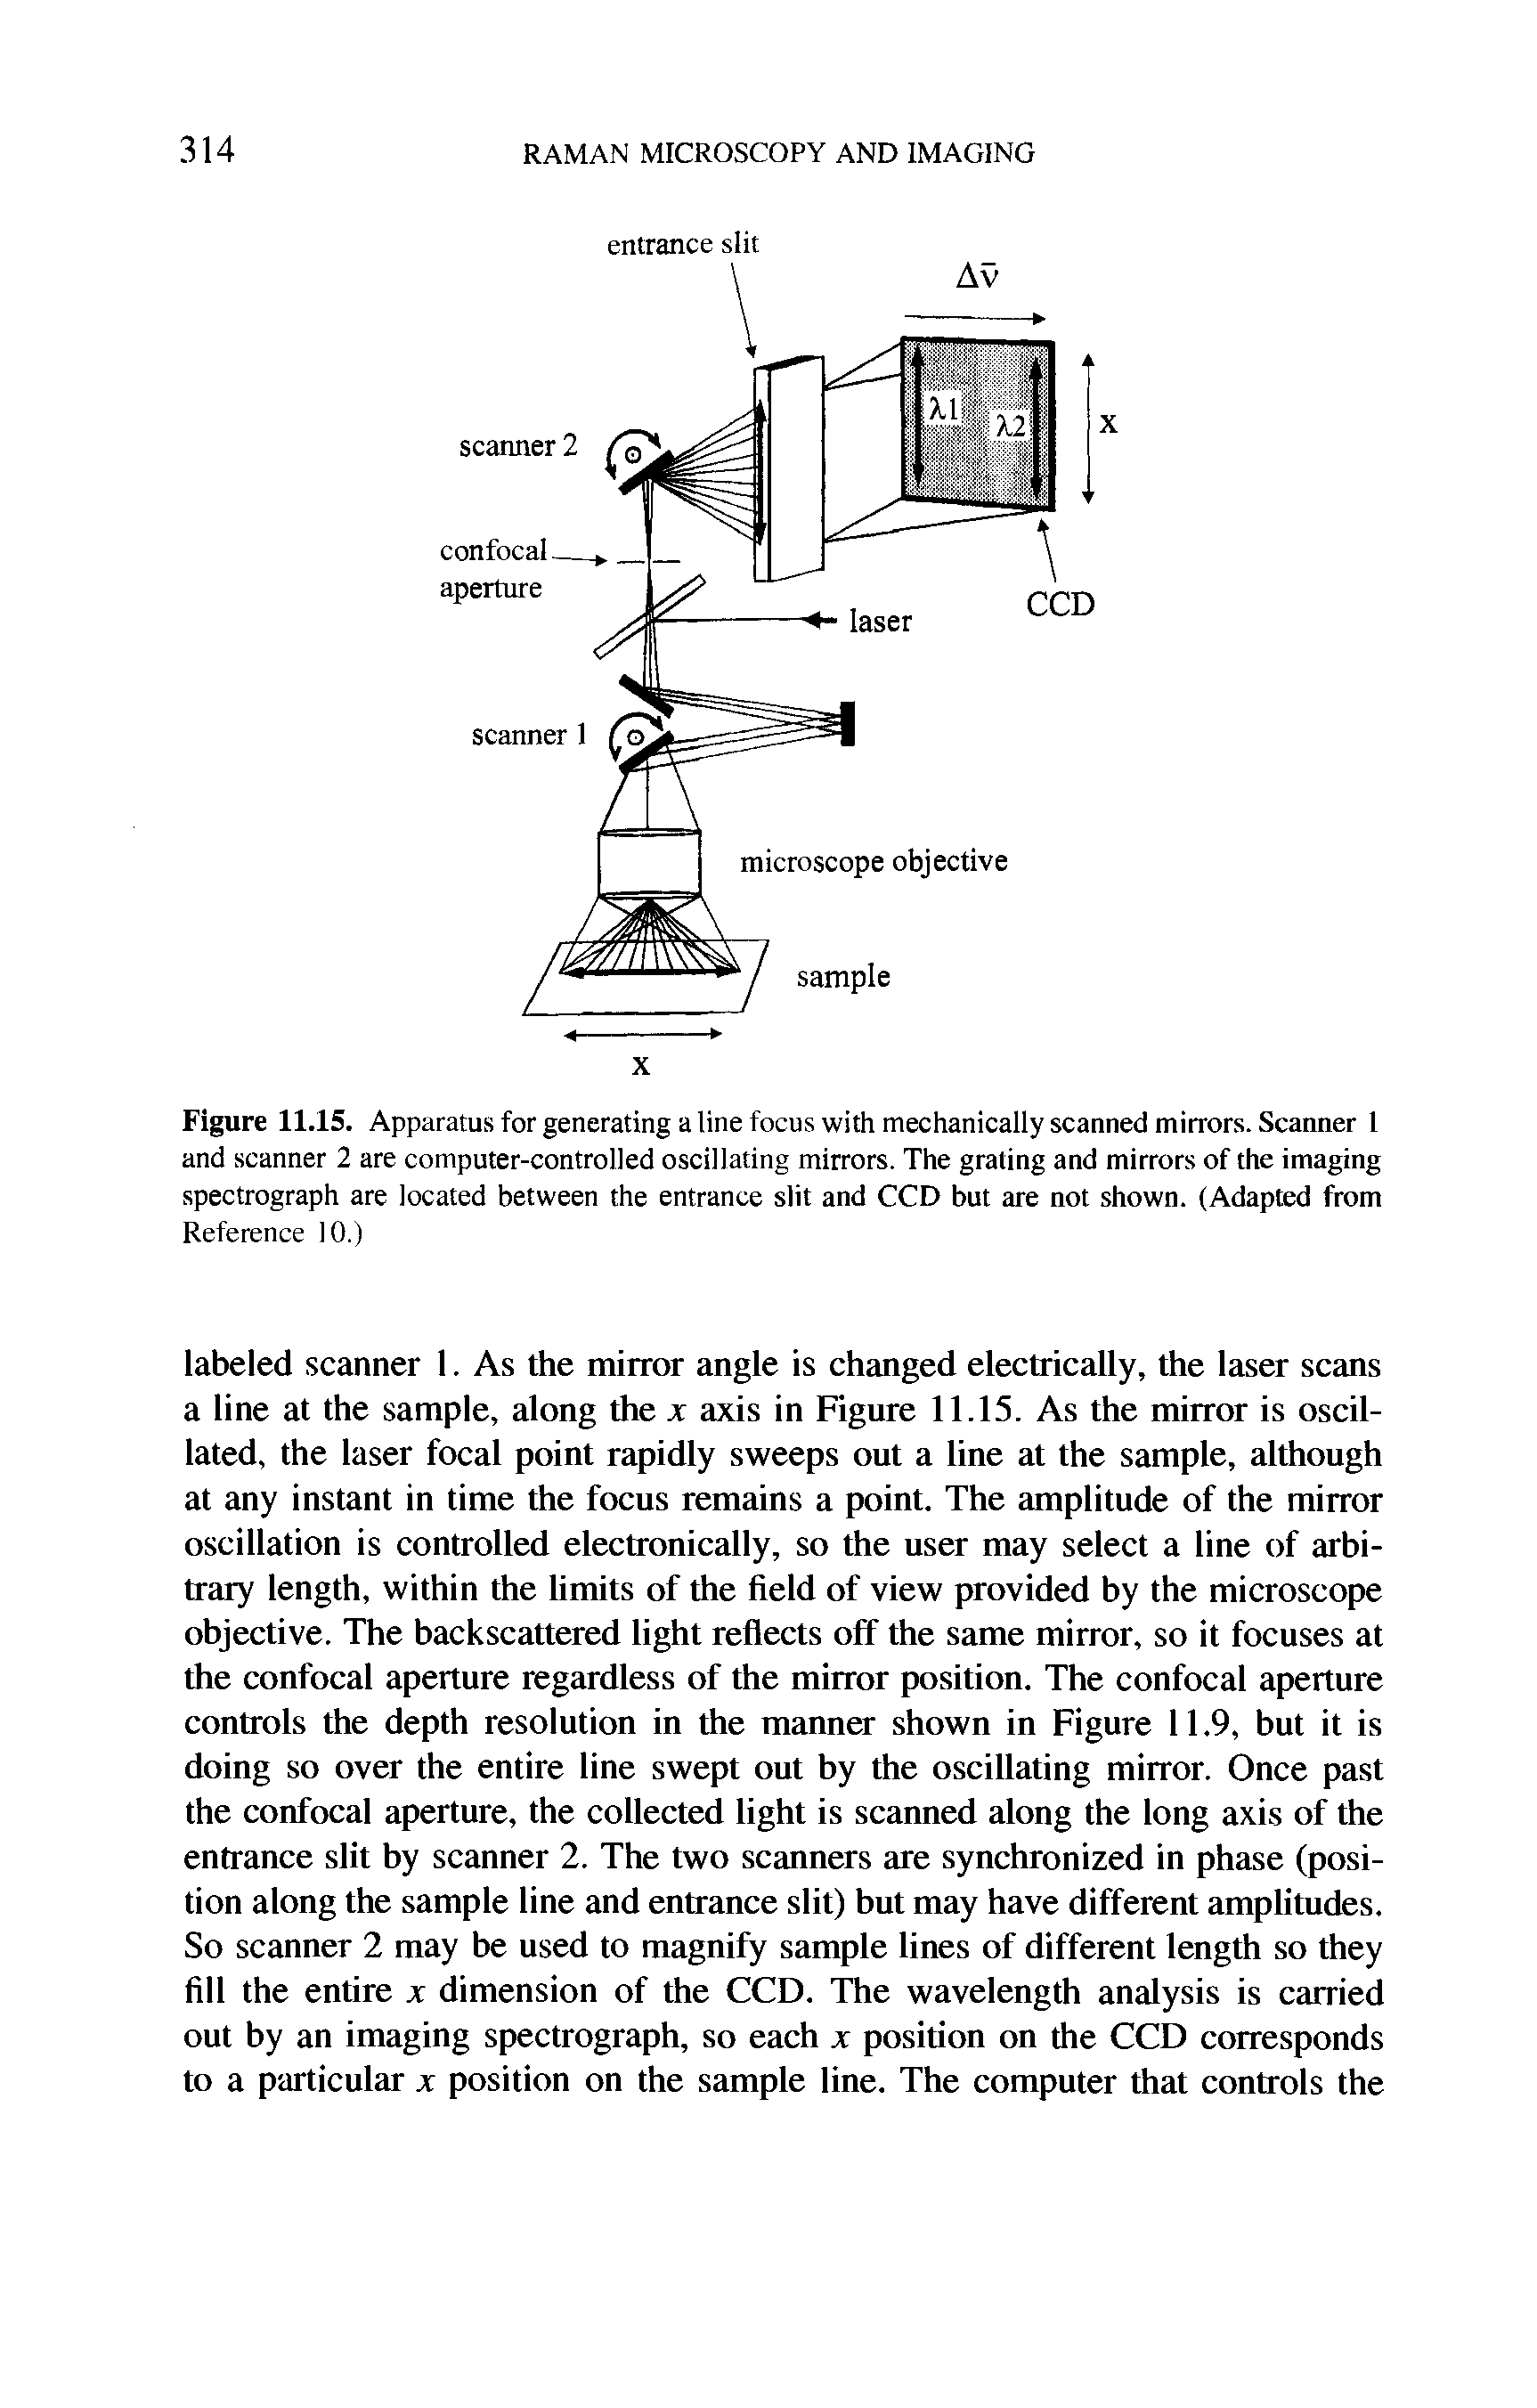 Figure 11.15. Apparatus for generating a line focus with mechanically scanned mirrors. Scanner 1 and scanner 2 are computer-controlled oscillating mirrors. The grating and mirrors of the imaging spectrograph are located between the entrance slit and CCD but are not shown. (Adapted from...